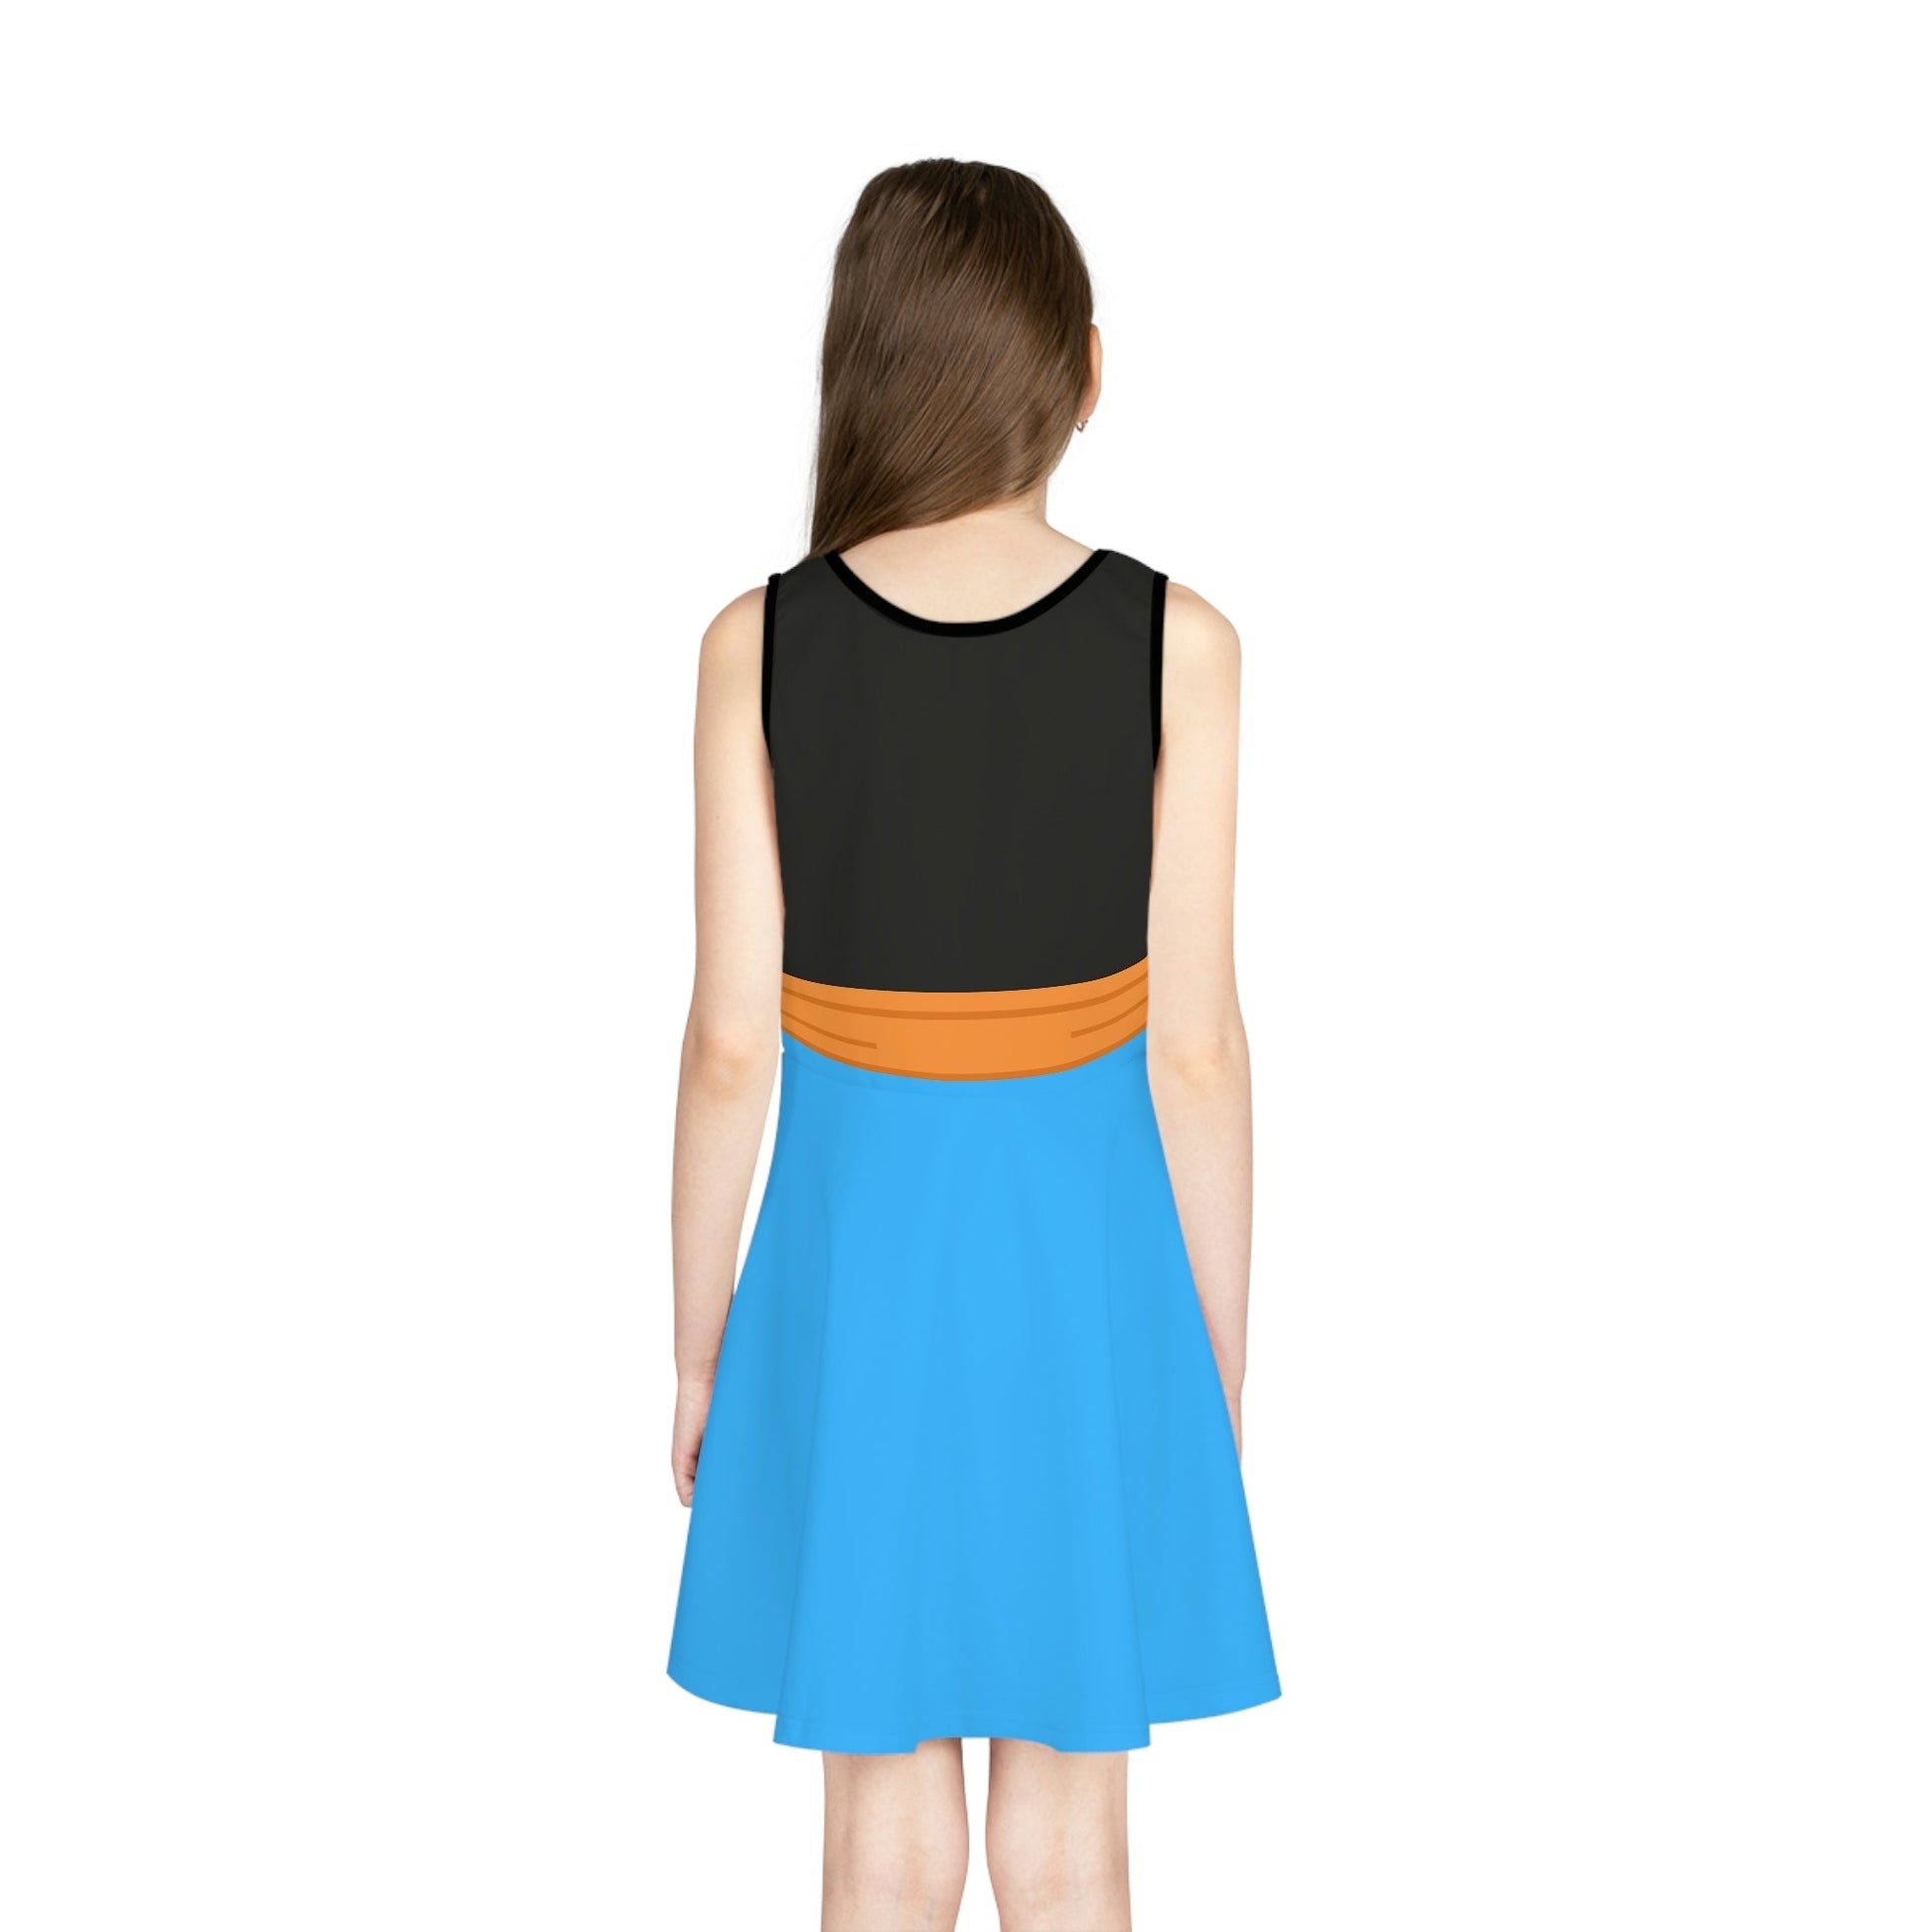 The Goof Girls' Sleeveless Sundress All Over PrintAOPAOP Clothing#tag4##tag5##tag6#